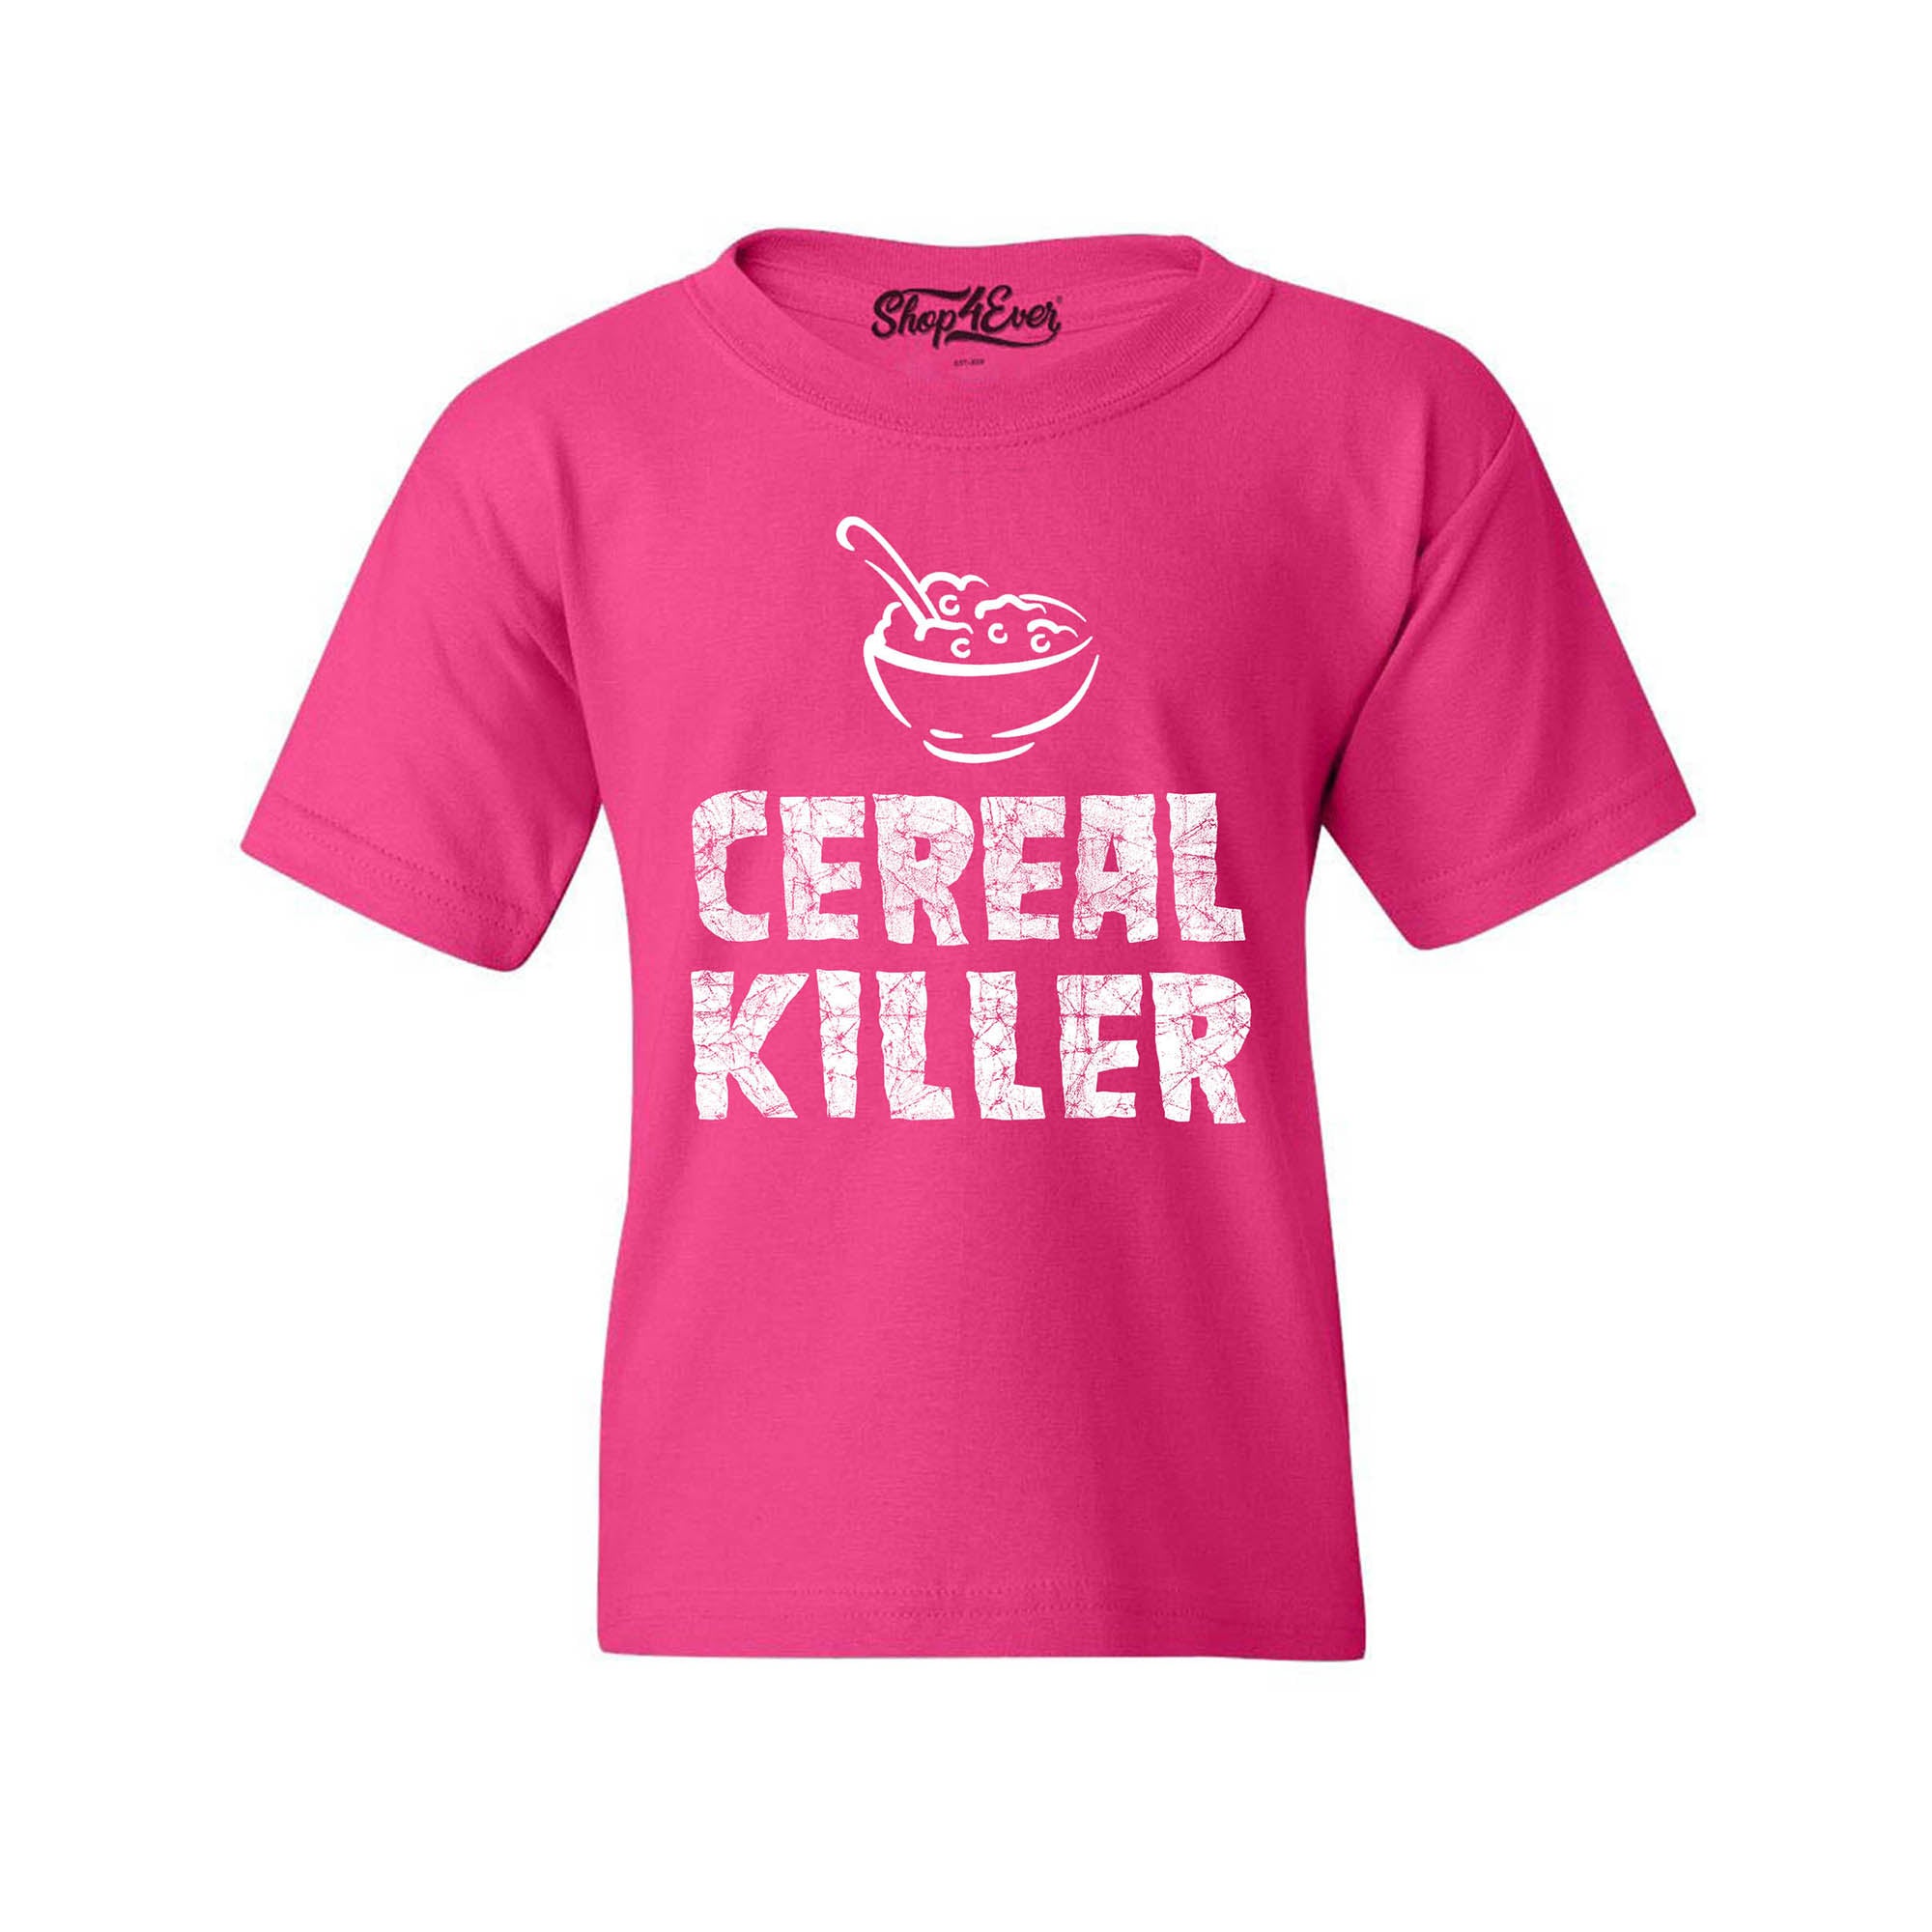 Cereal Killer Youth's T-Shirt Funny Kids Child Tee Shirts